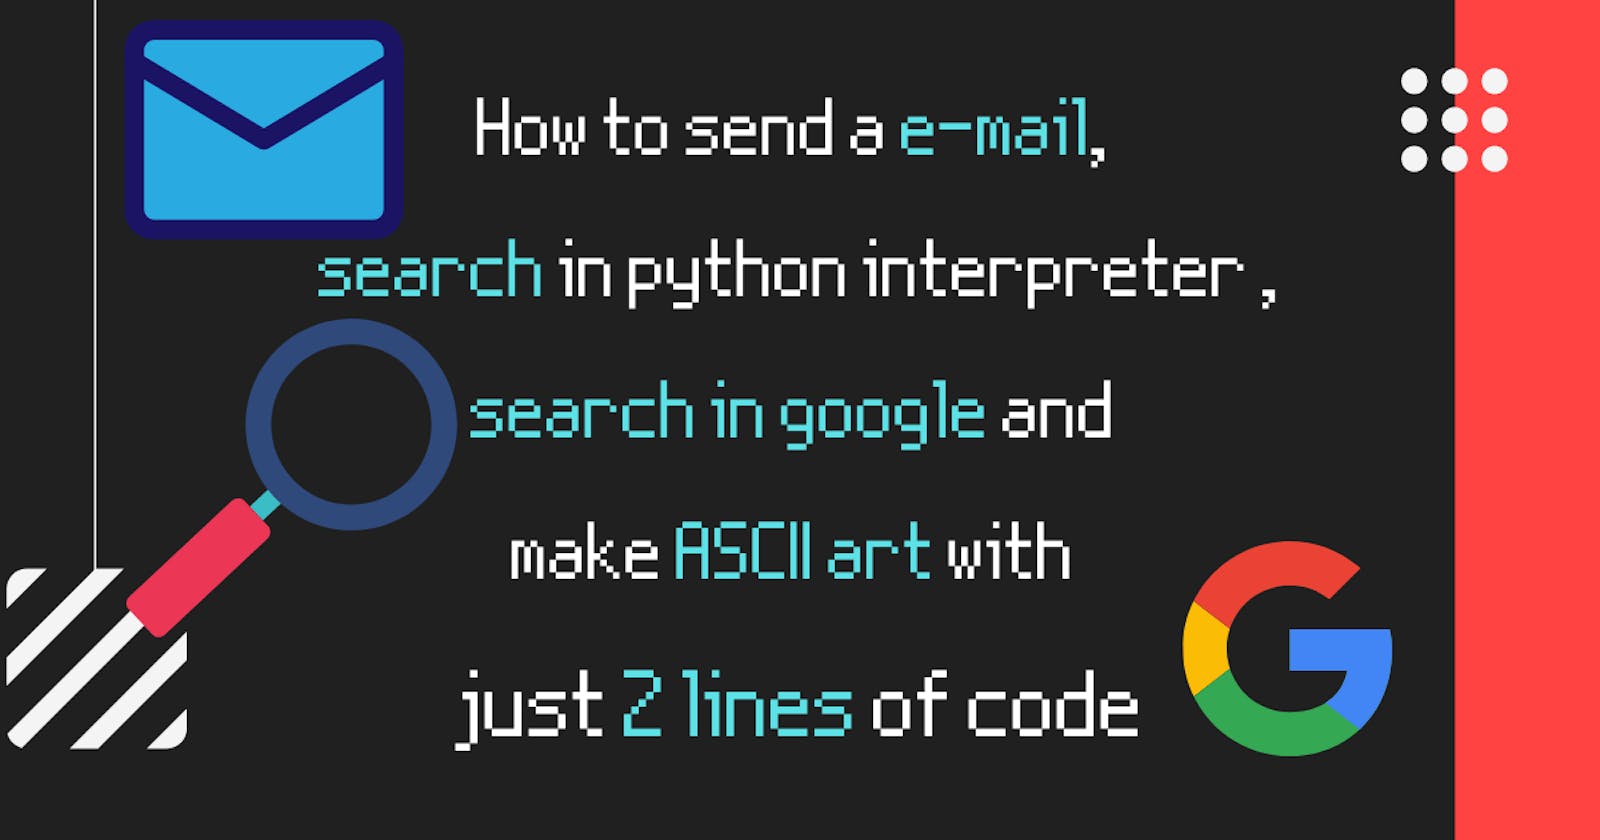 How to send a e-mail, search in python interpreter ,search in google and make ASCII art with just 2 lines of code